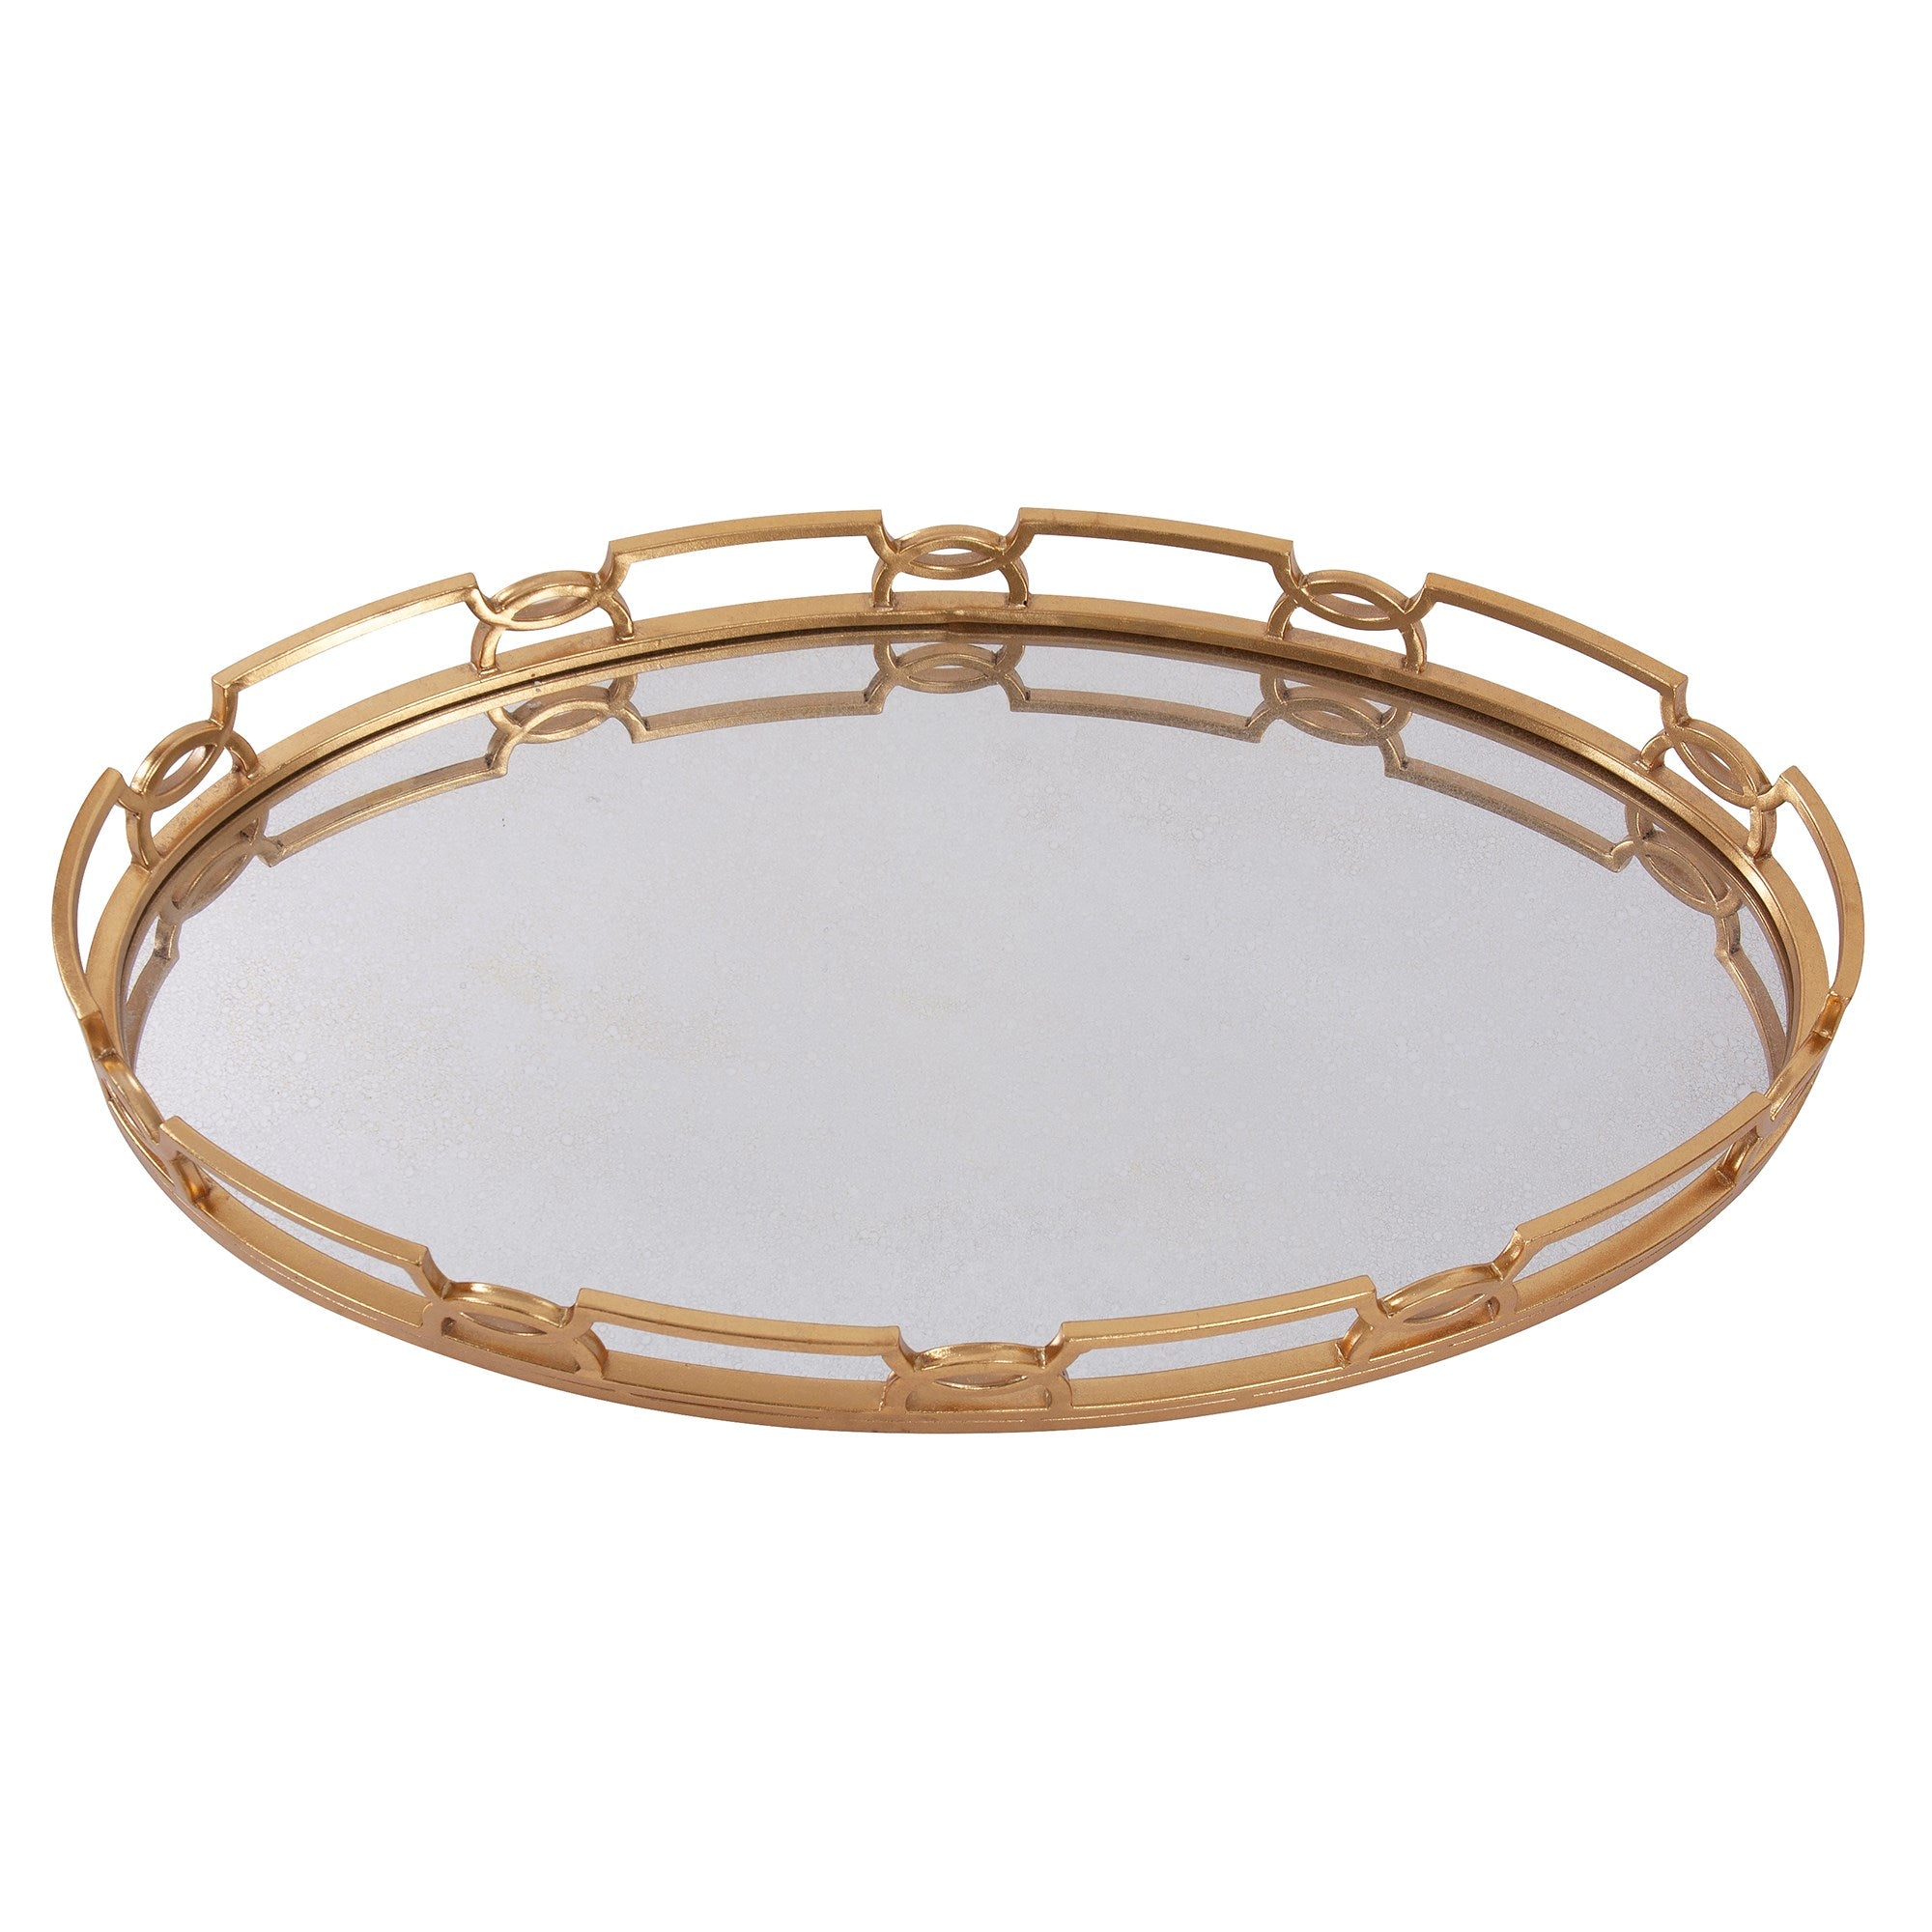 Bright Gold Metal Tray